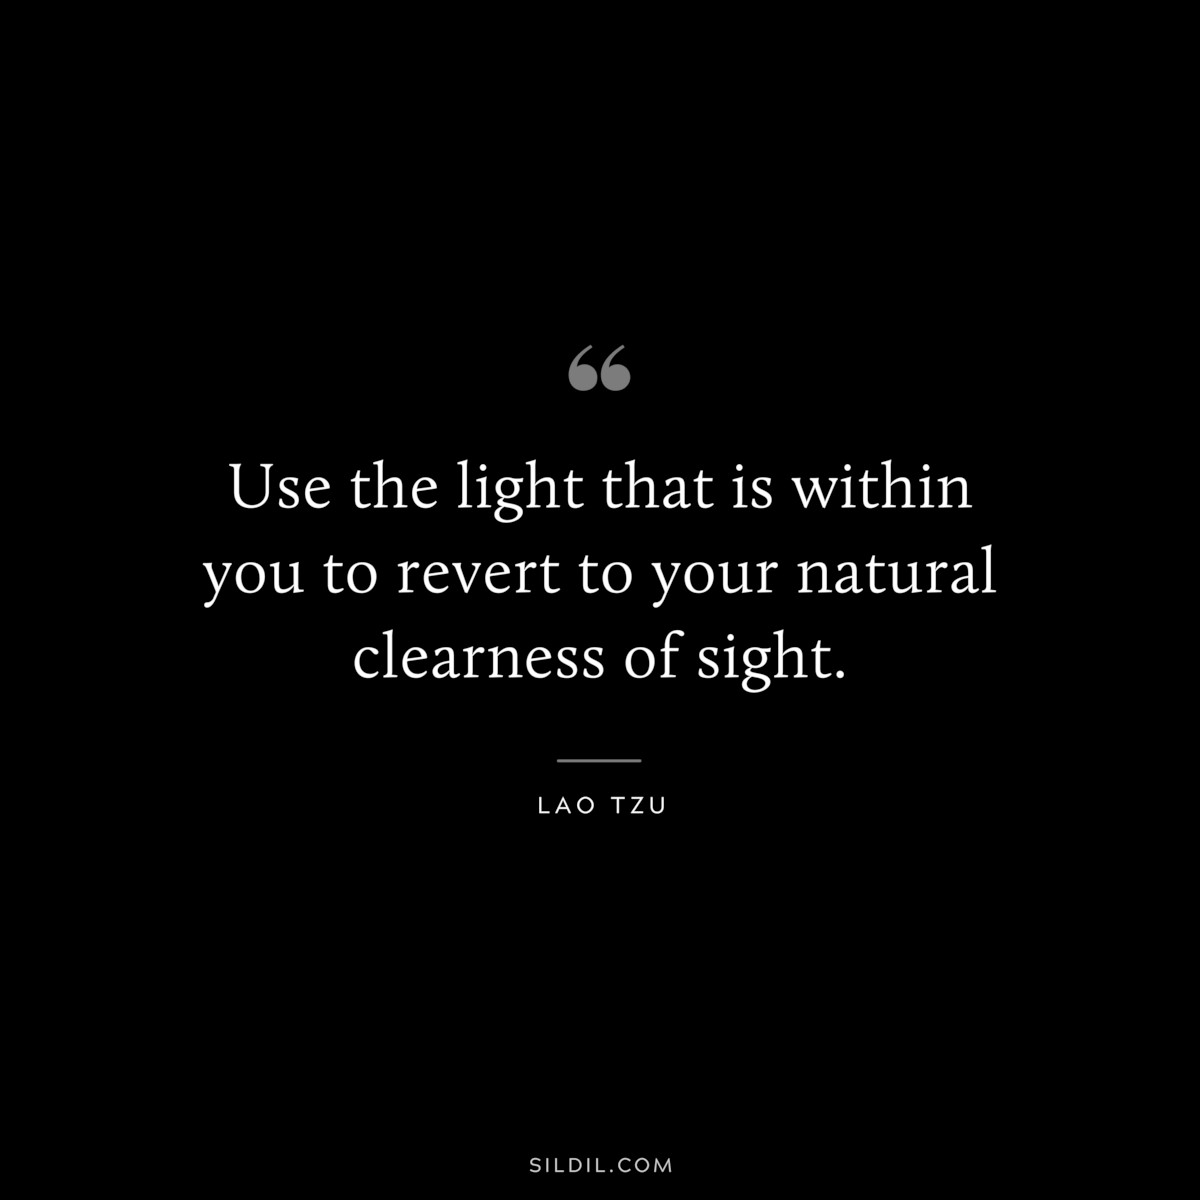 Use the light that is within you to revert to your natural clearness of sight. ― Lao Tzu